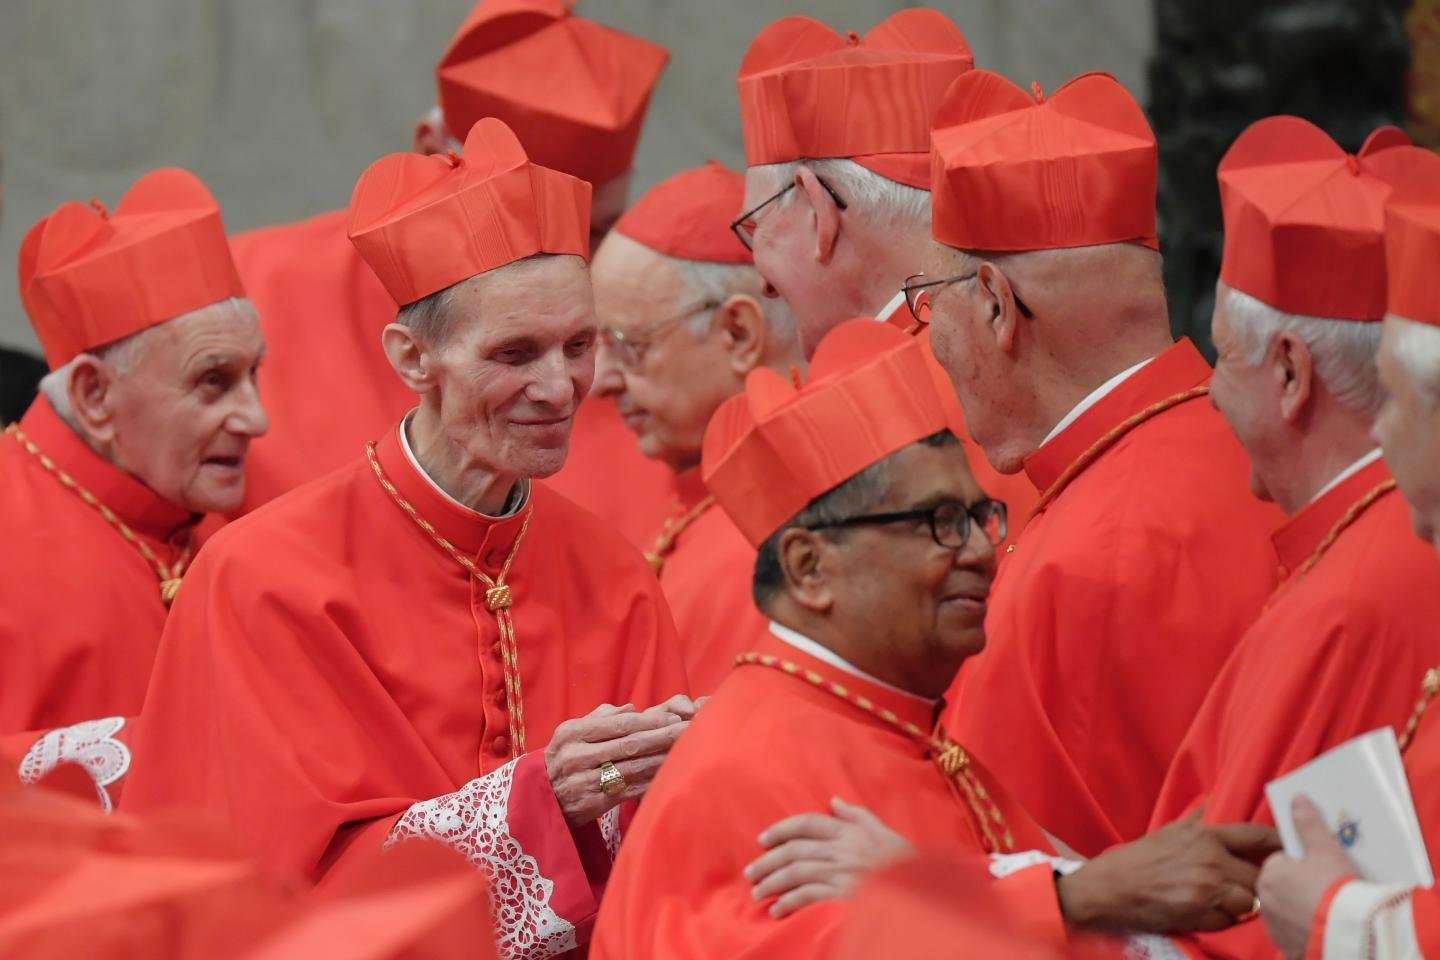 image for Male Escort Exposes 36 Gay Priests in File Sent to Vatican Containing Explicit WhatsApp Chats and Erotic Photos